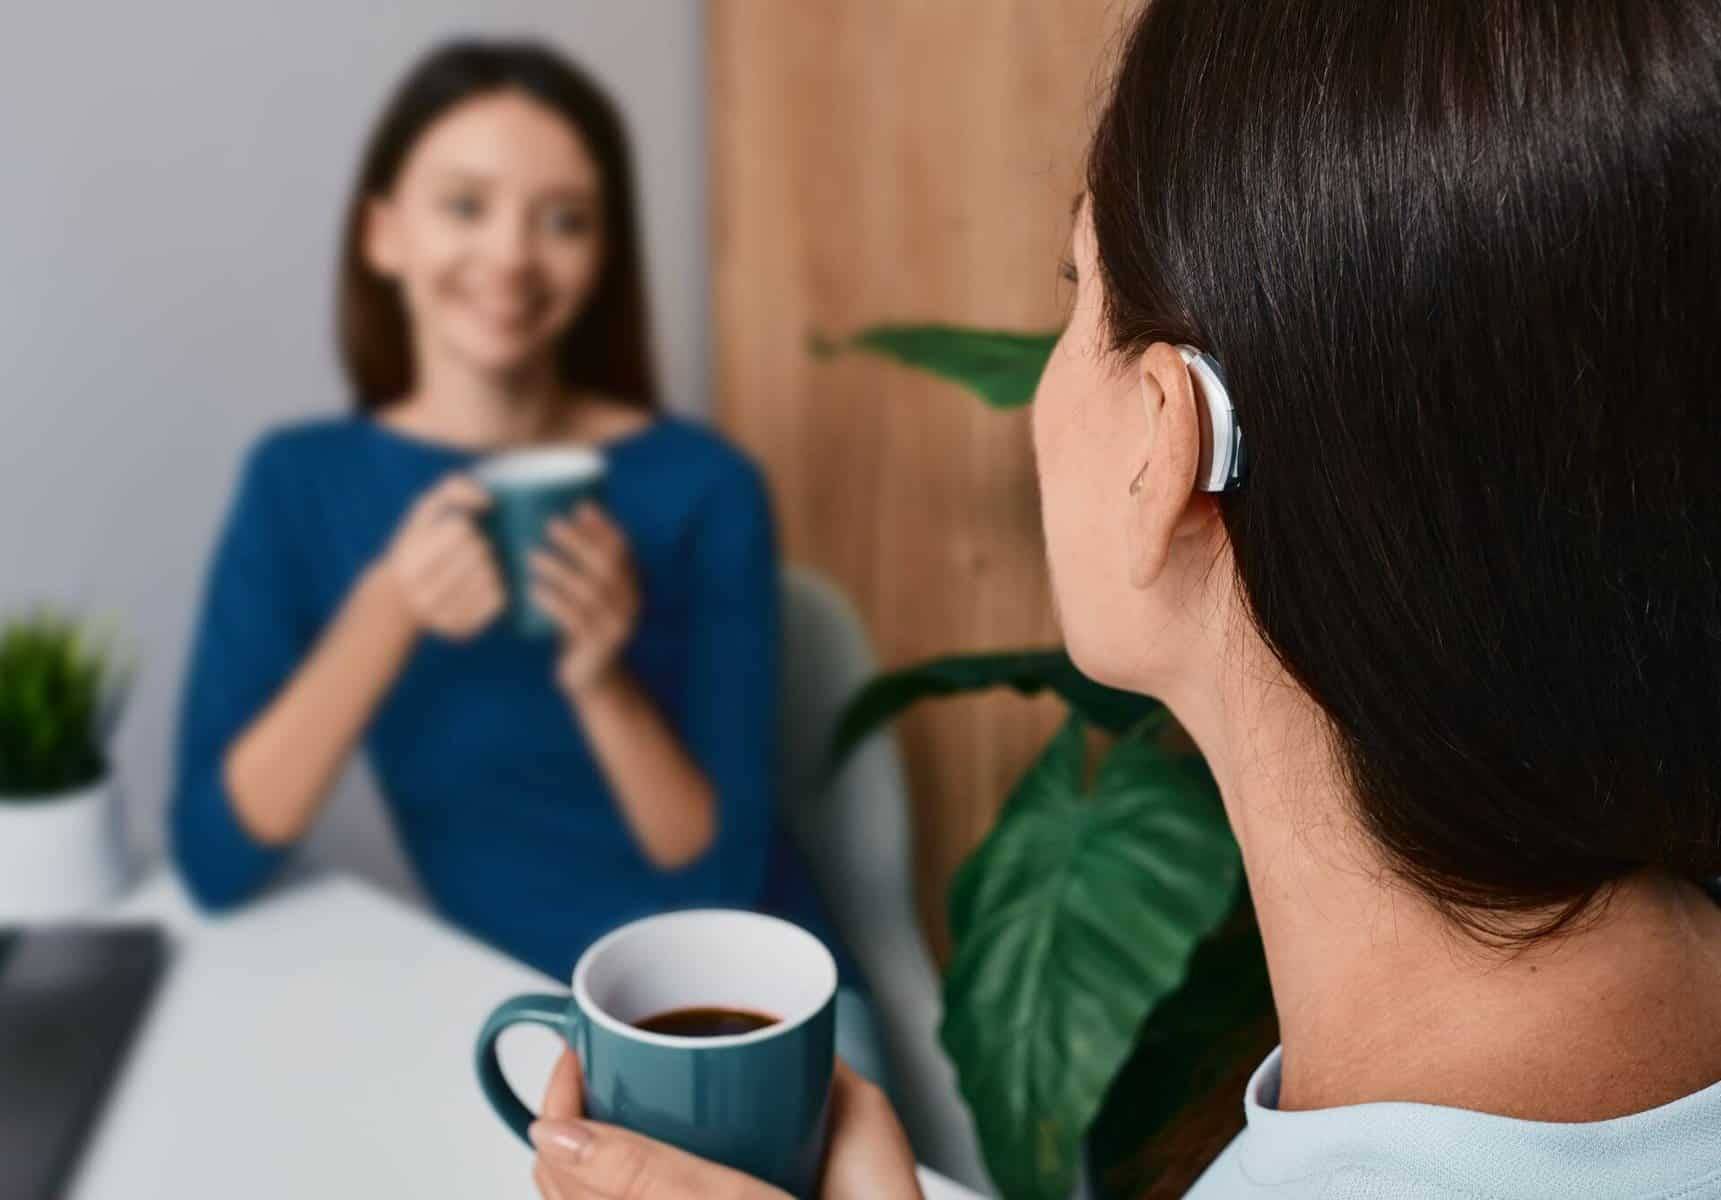 Woman with hearing aid having coffee and conversation with another woman